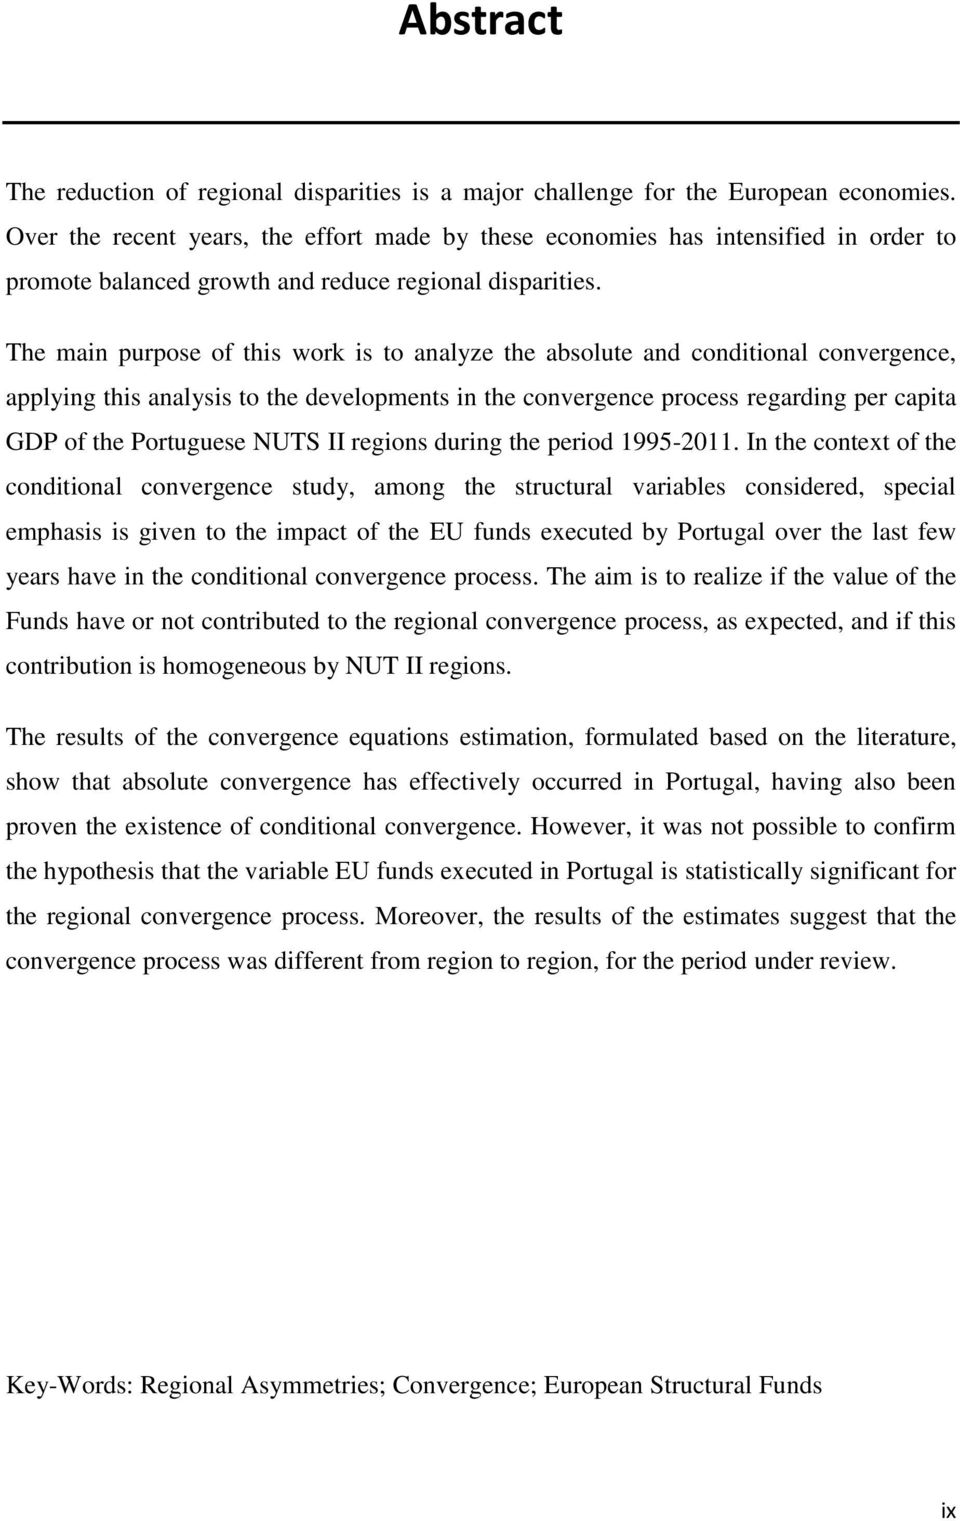 The main purpose of this work is to analyze the absolute and conditional convergence, applying this analysis to the developments in the convergence process regarding per capita GDP of the Portuguese